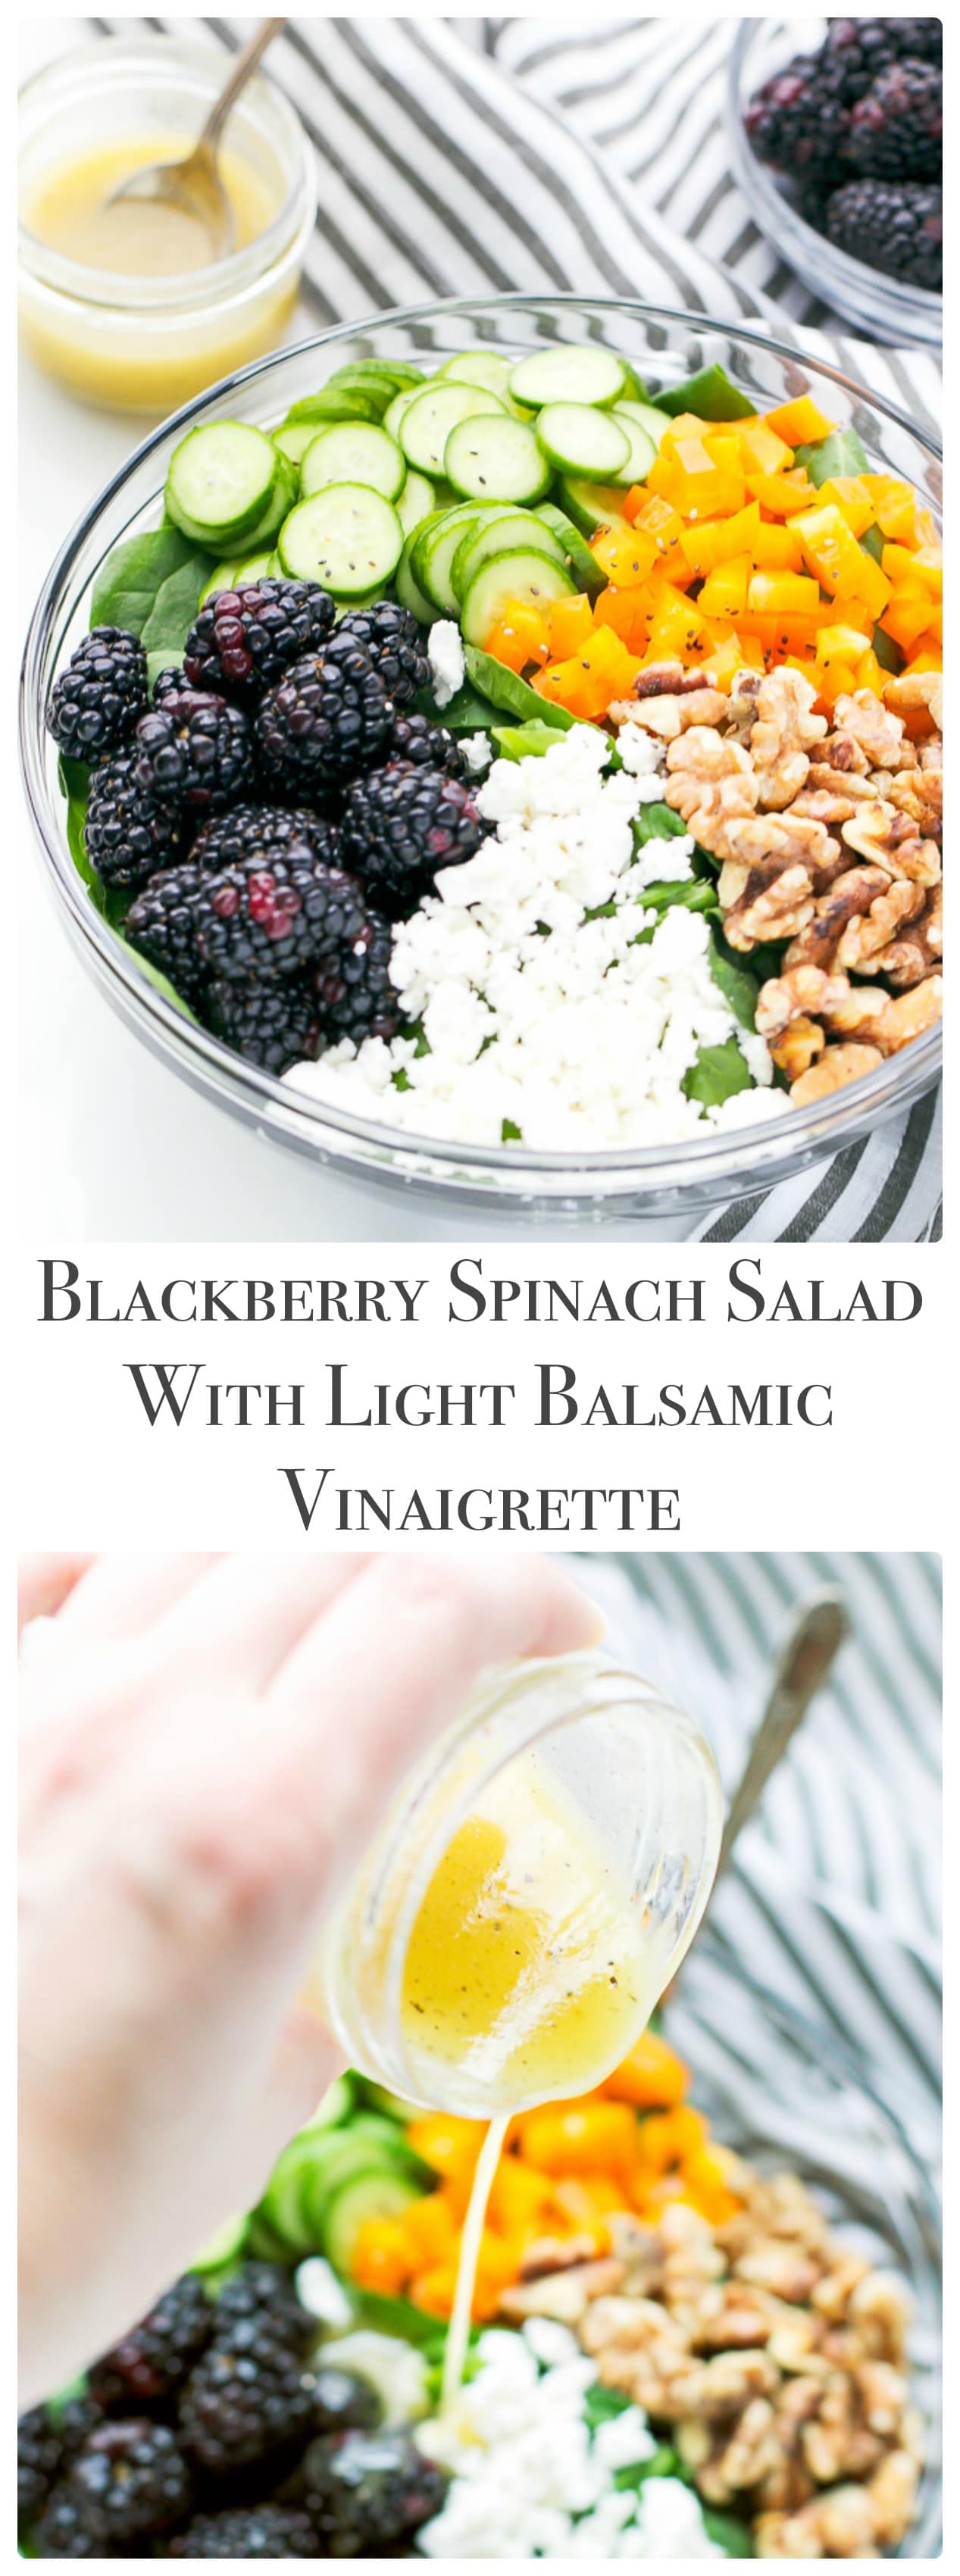 Blackberry Spinach Salad With Light Balsamic Vinaigrette in a bowl